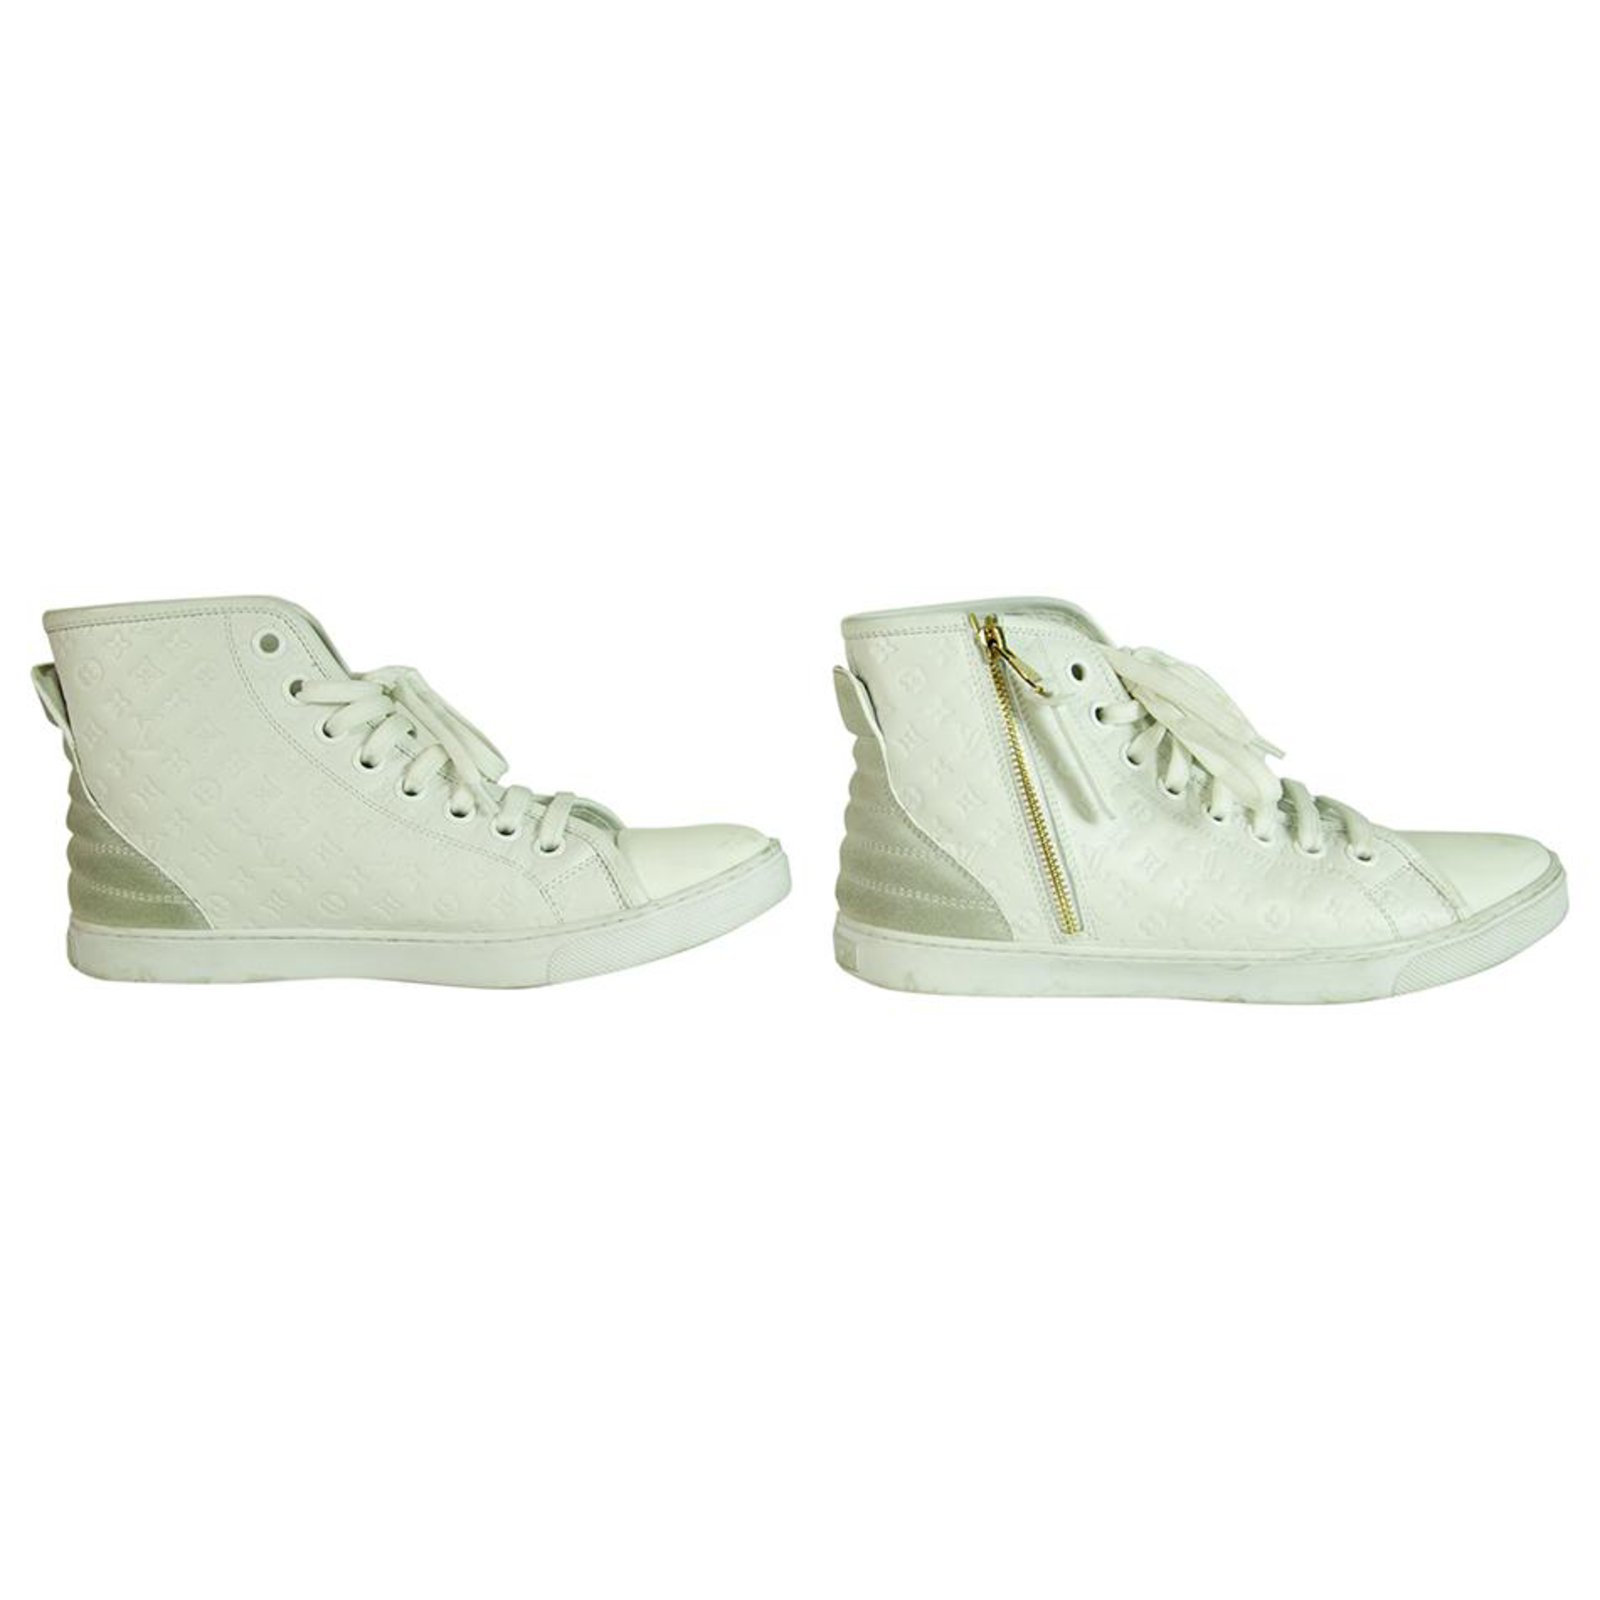 Louis Vuitton Beige/White Leather And Embossed Monogram Suede Millenium  Wedge Sneakers Size 36.5 Louis Vuitton